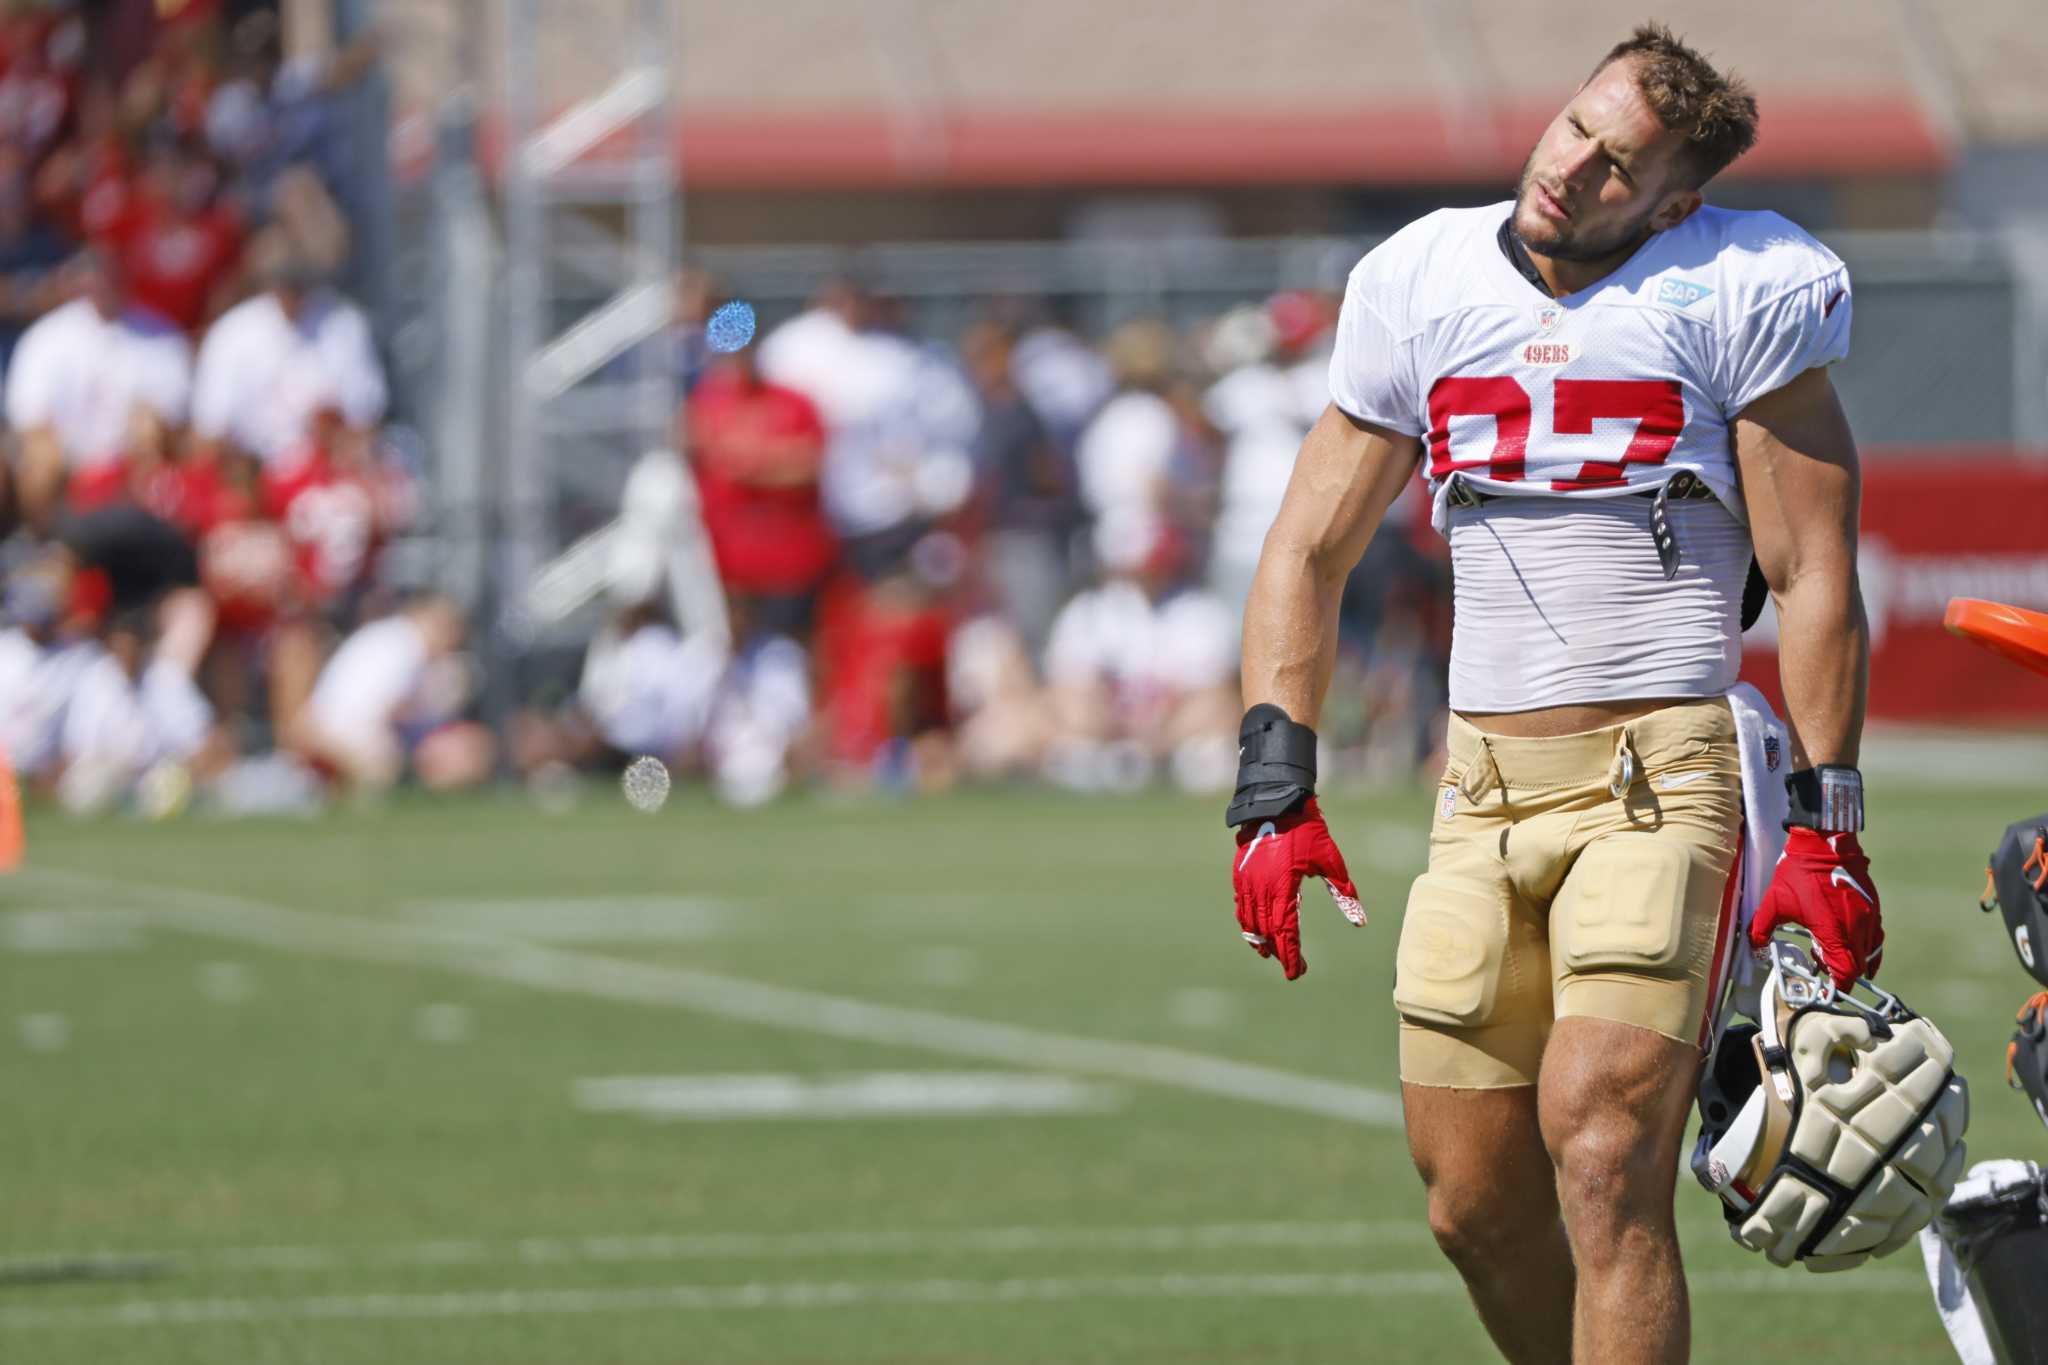 49ers sign Nick Bosa to a record-setting contract extension to end his  lengthy holdout